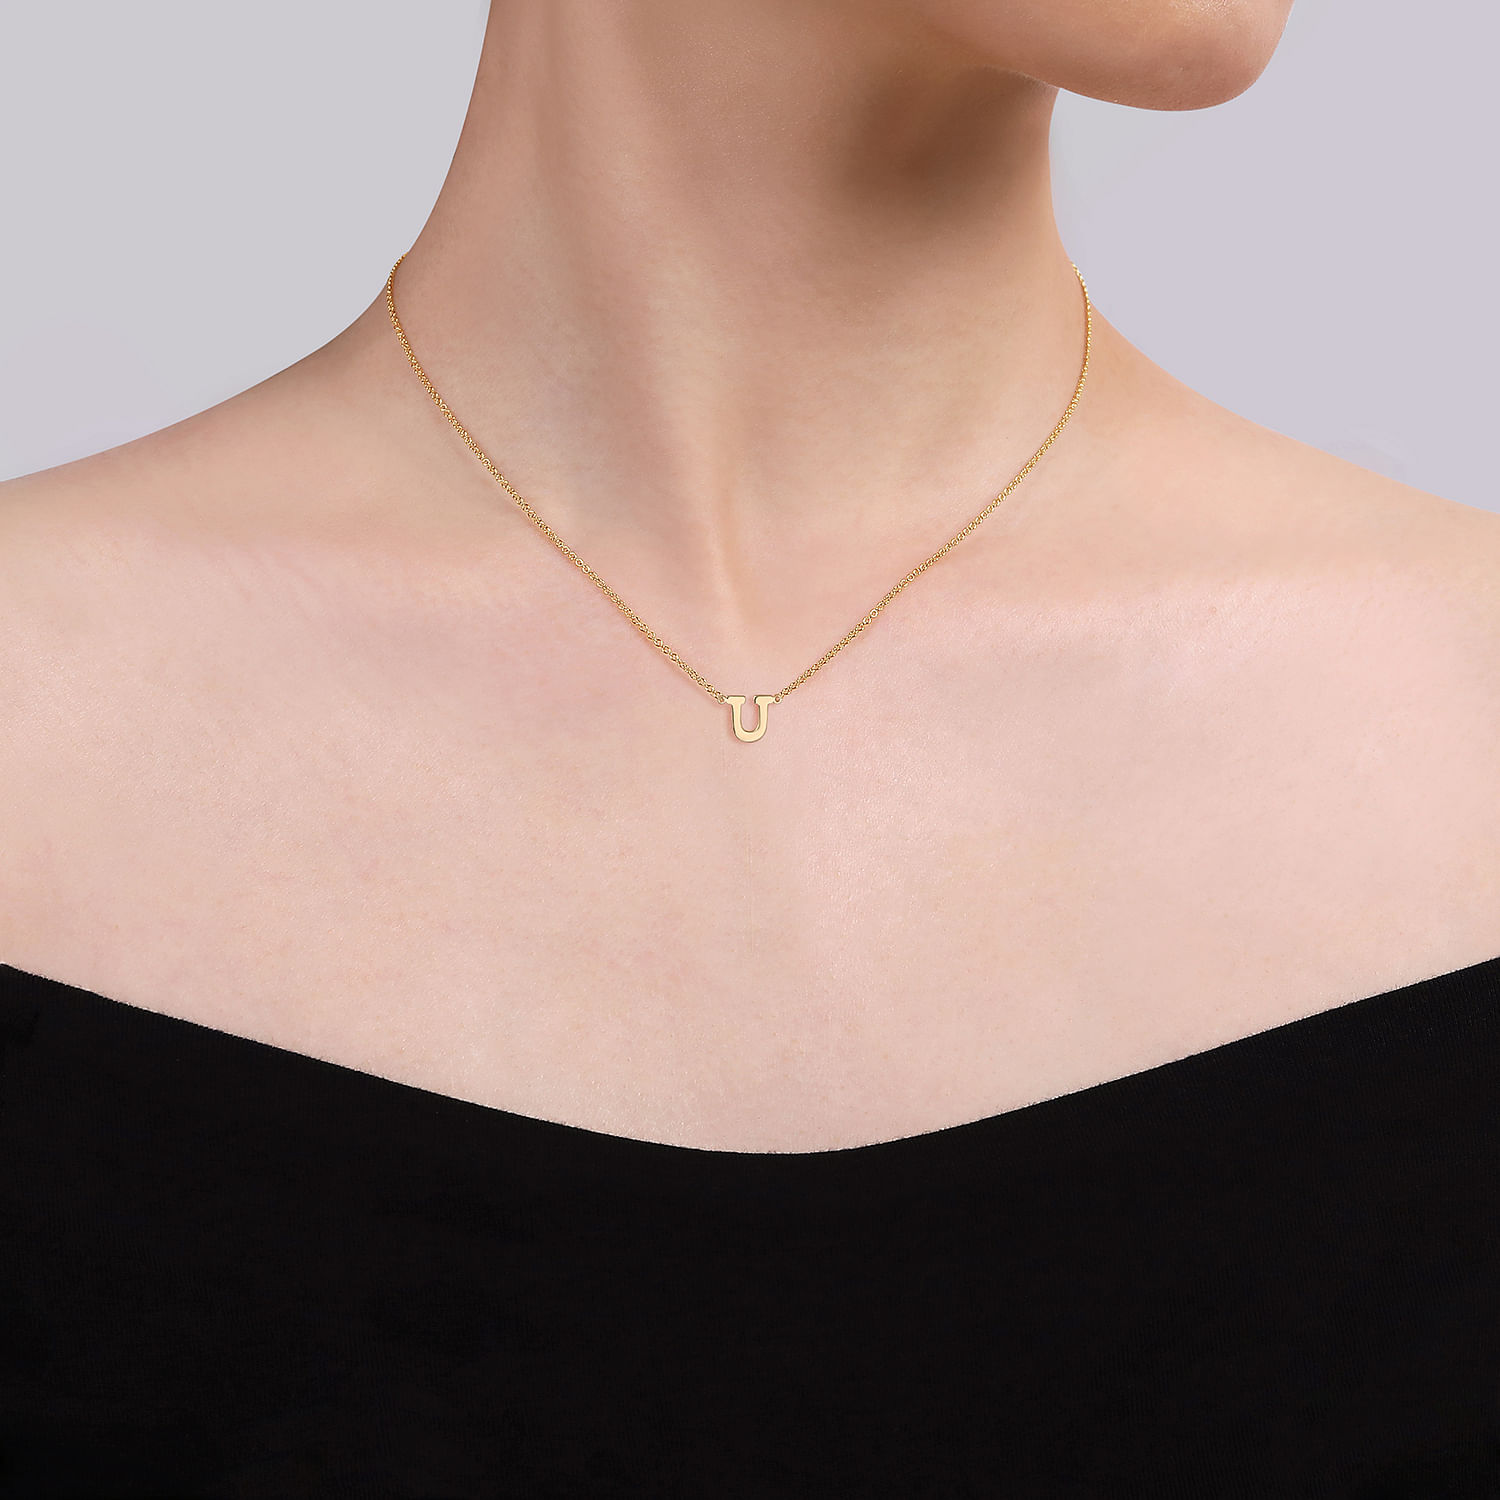 14K Yellow Gold U Initial Necklace